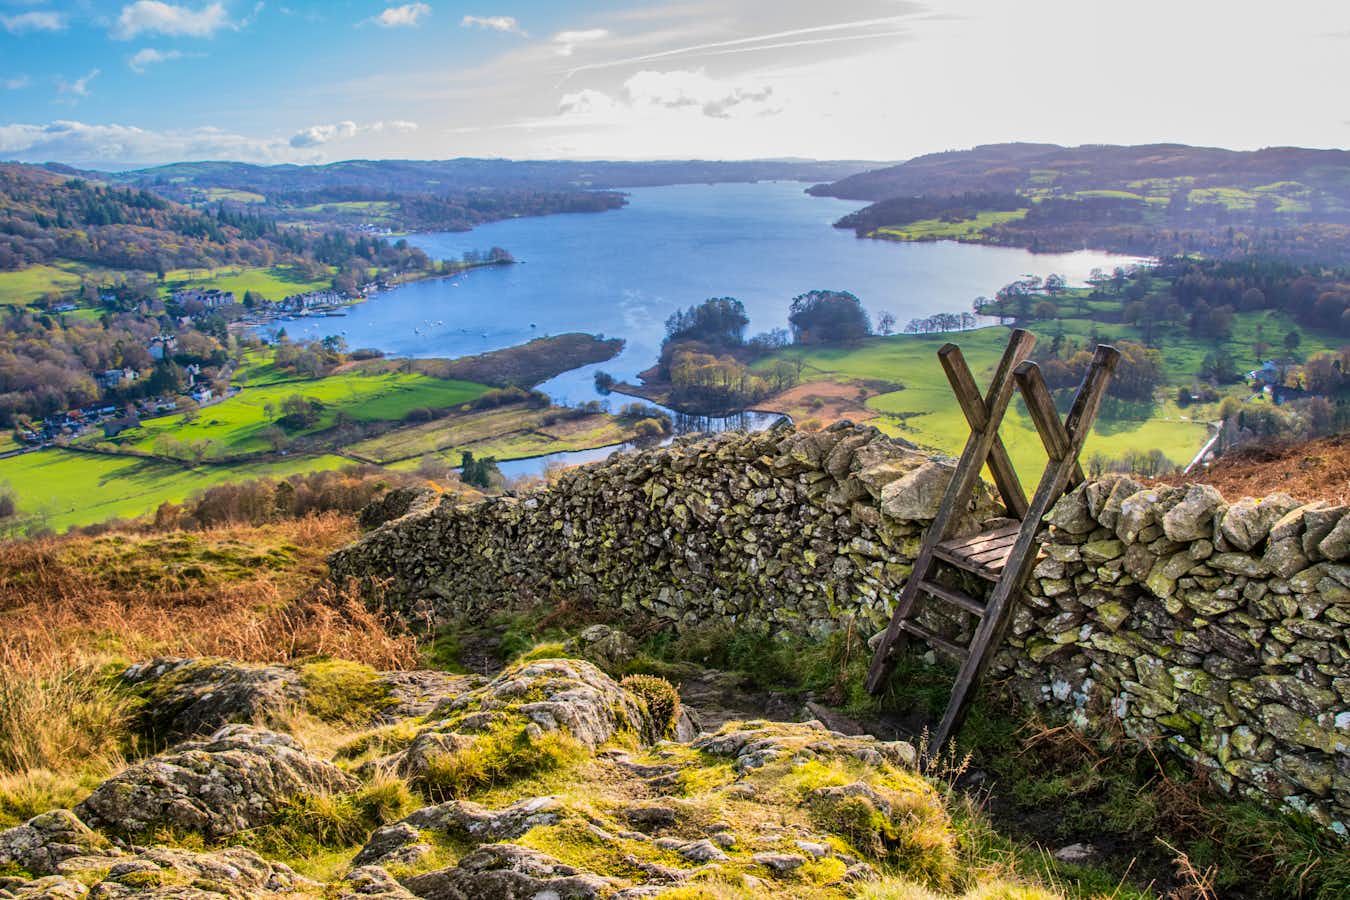 tourhub | Shearings | Christmas in Windermere and the Lake District 